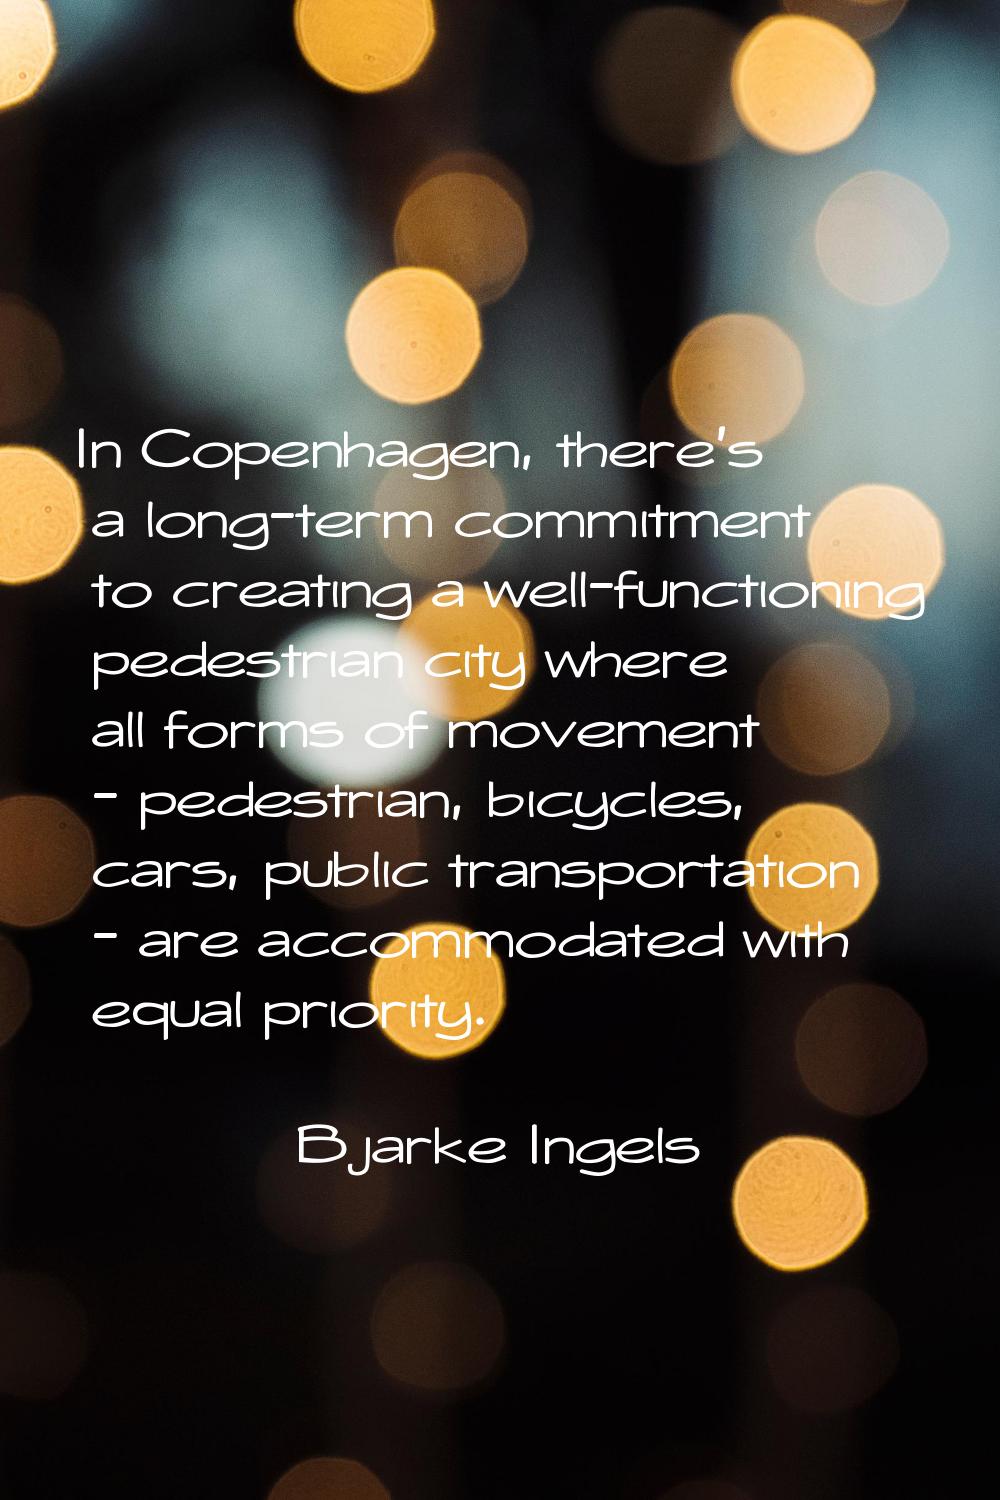 In Copenhagen, there's a long-term commitment to creating a well-functioning pedestrian city where 